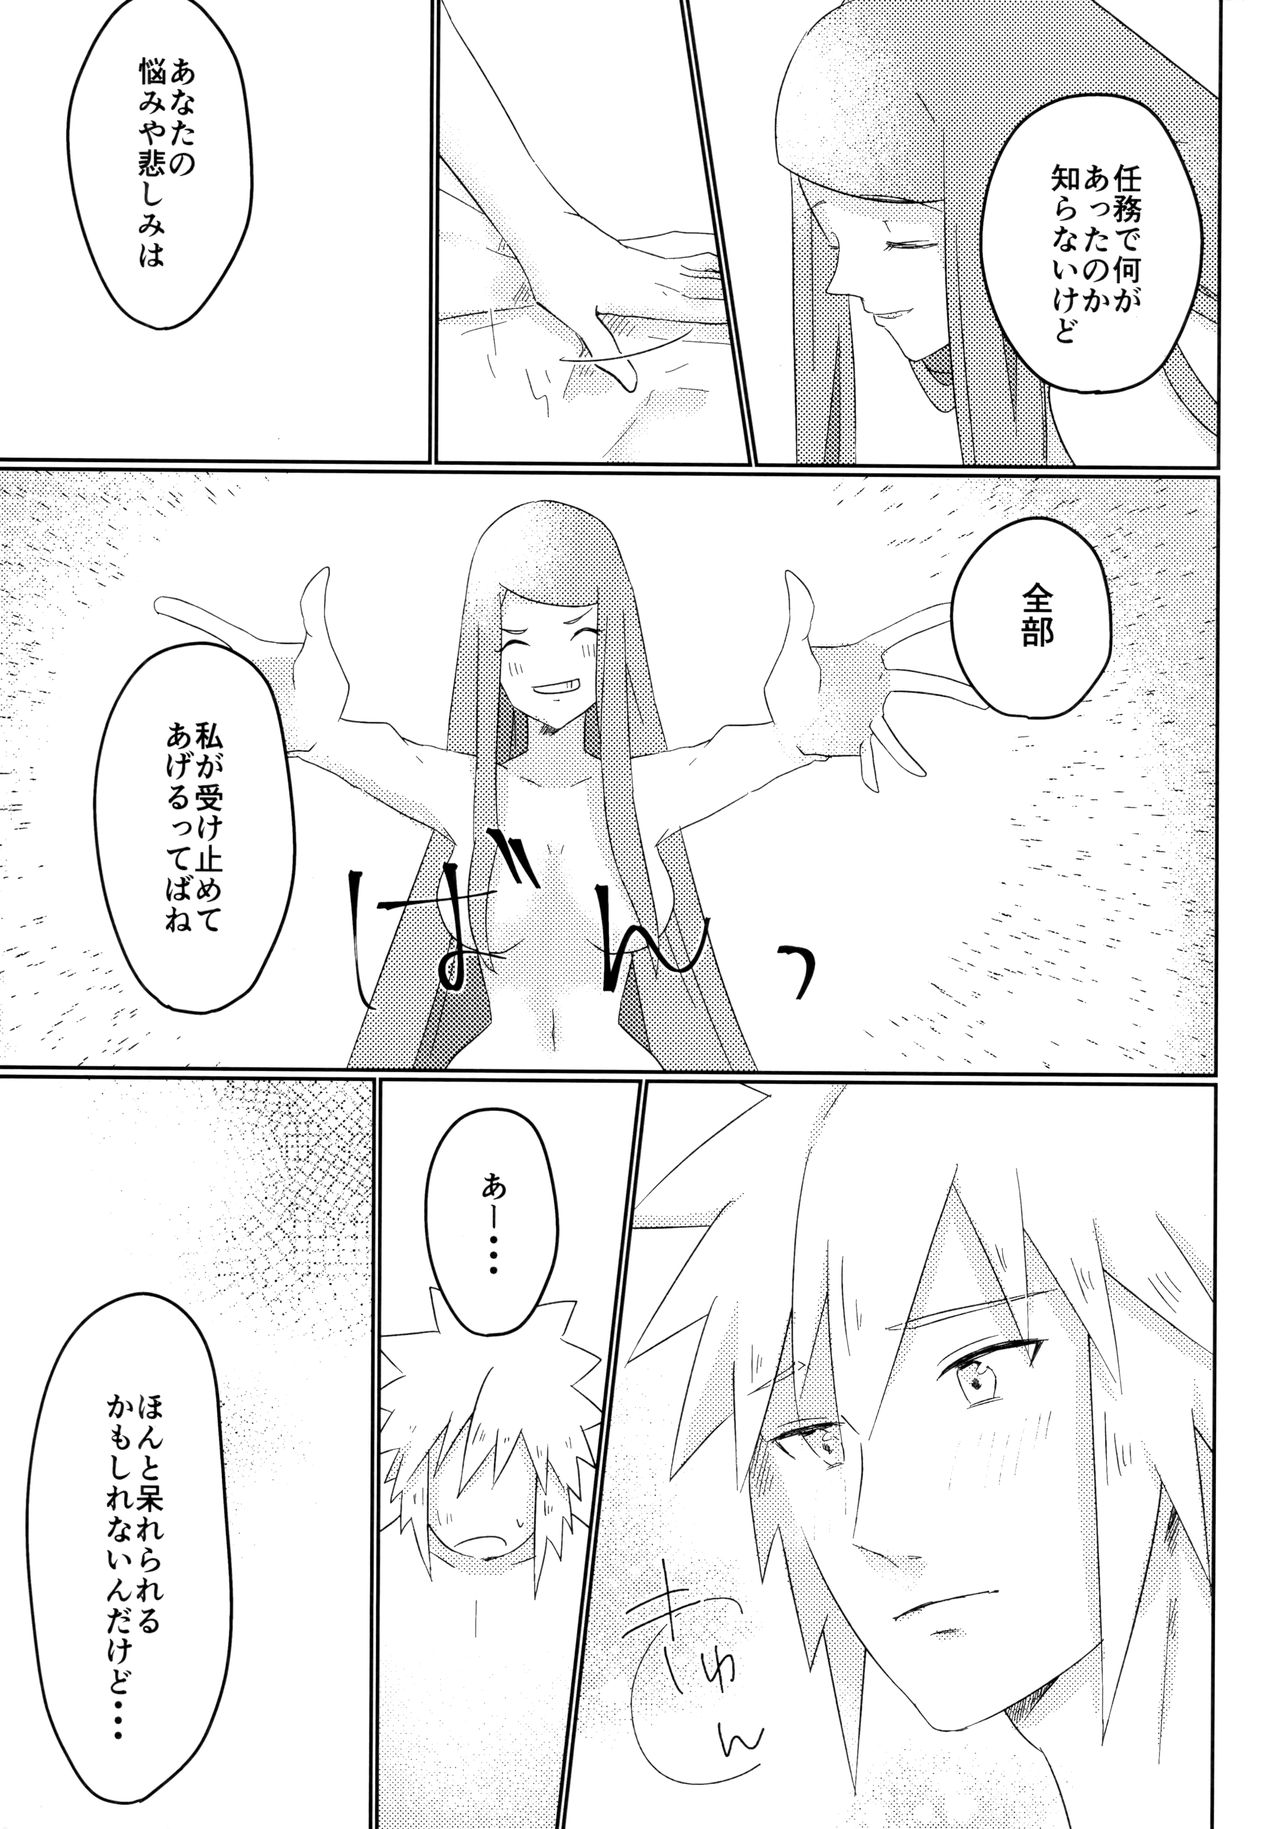 (Zennin Shuuketsu 6) [Fragrant Olive (SIN)] Only You Know (Naruto) page 20 full